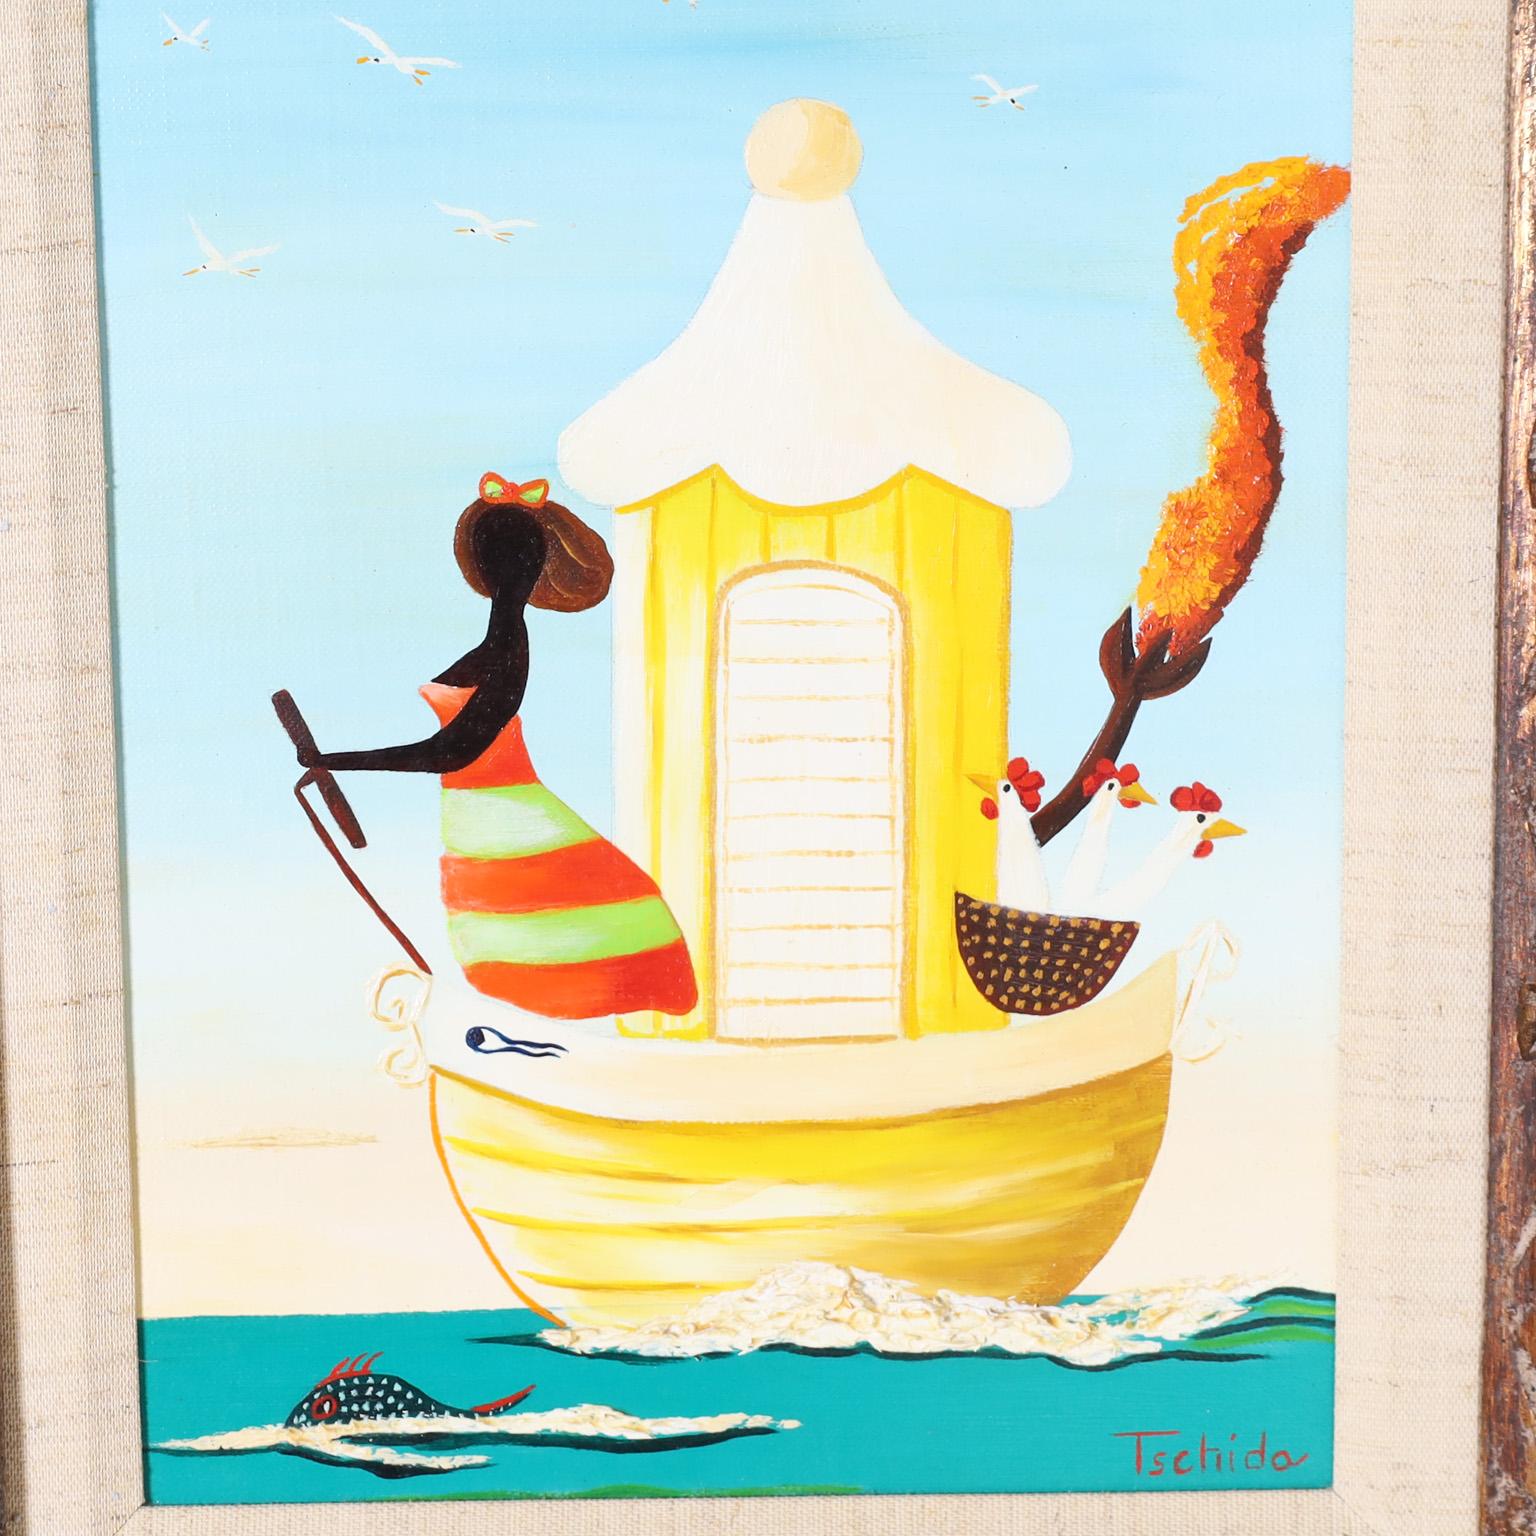 Whimsical acrylic painting on canvas of a boat with a woman and three chickens in a basket executed in a delightful naive style, reminiscent of Orville Bulman. Signed Tschida, titled 